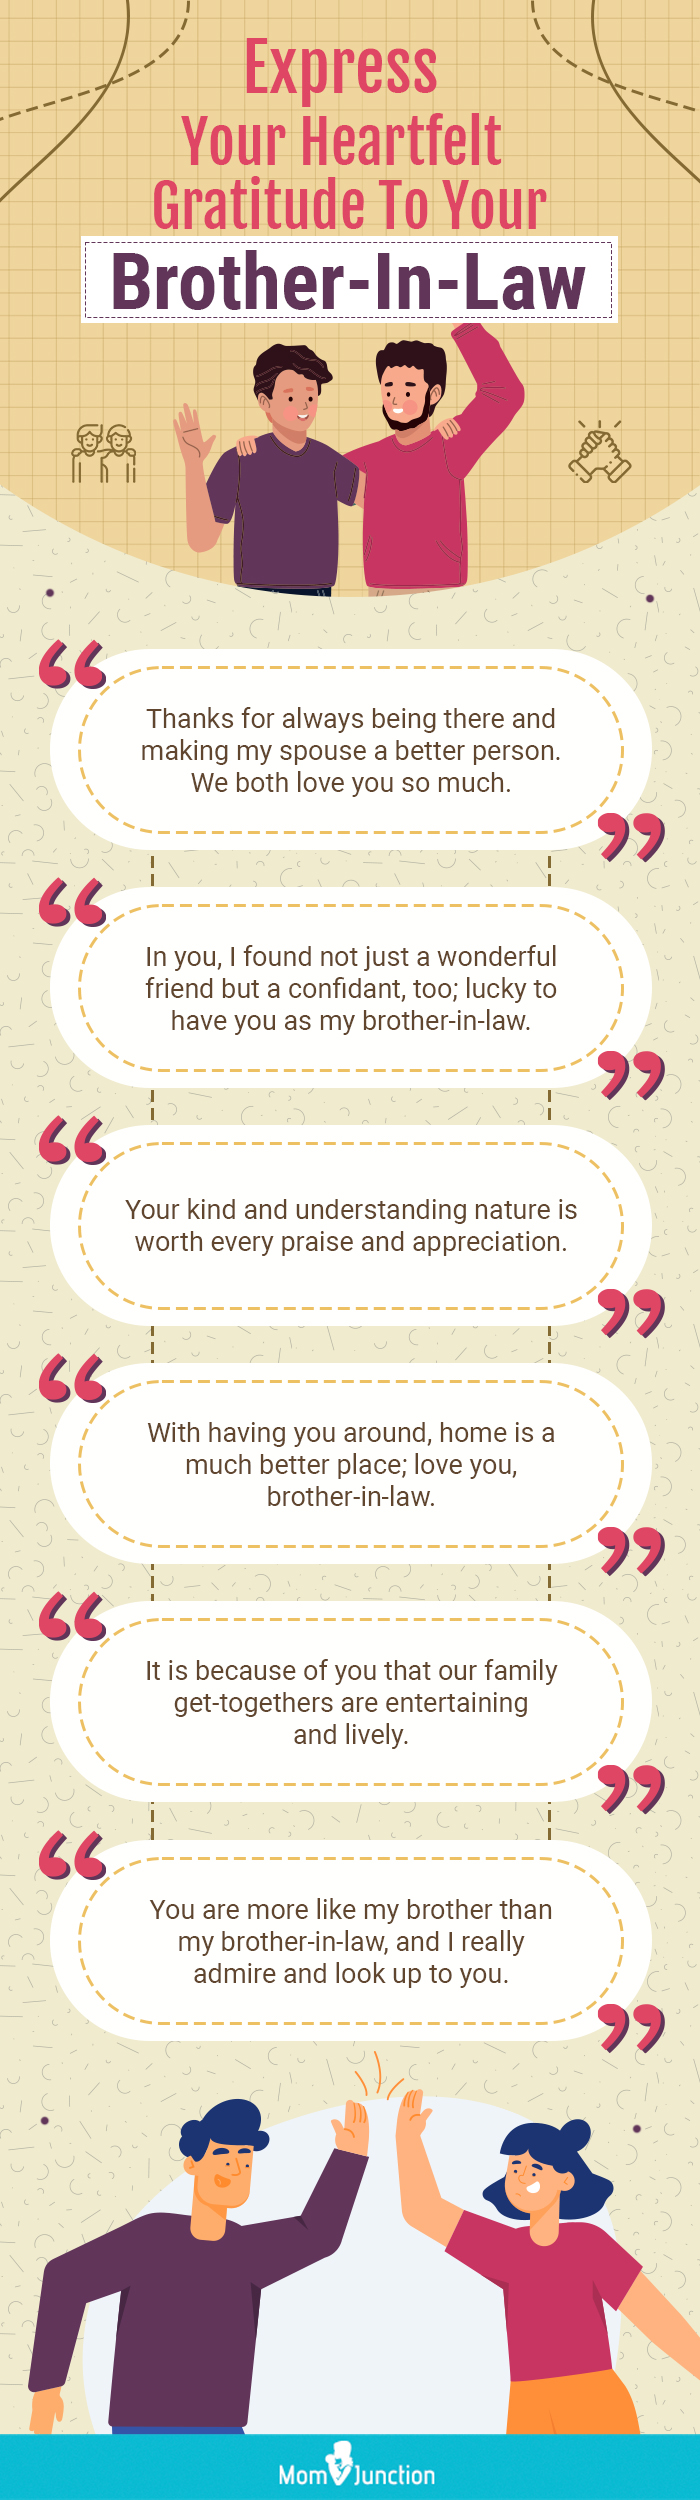 express your heartfelt gratitude to your brother in law (infographic)